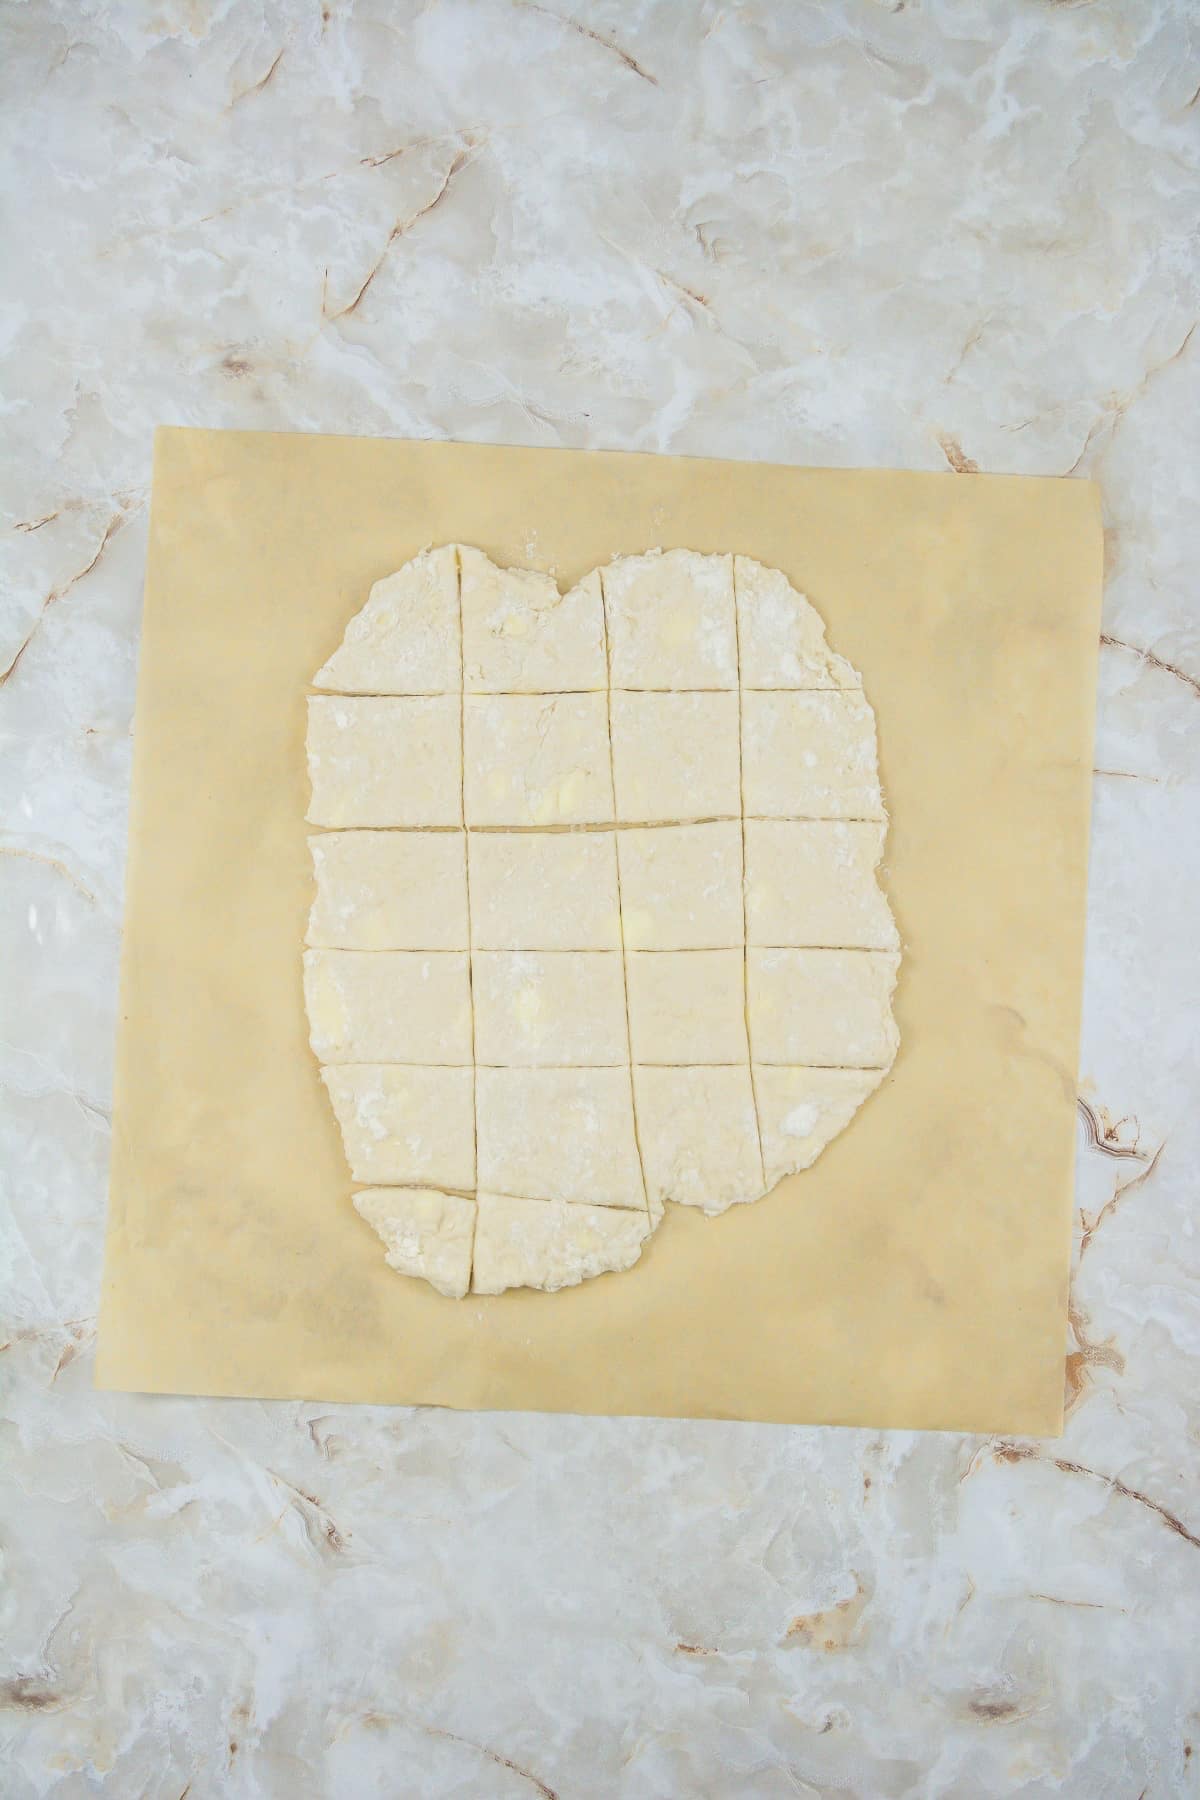 Dough rolled out and cut into squares on a piece of parchment.